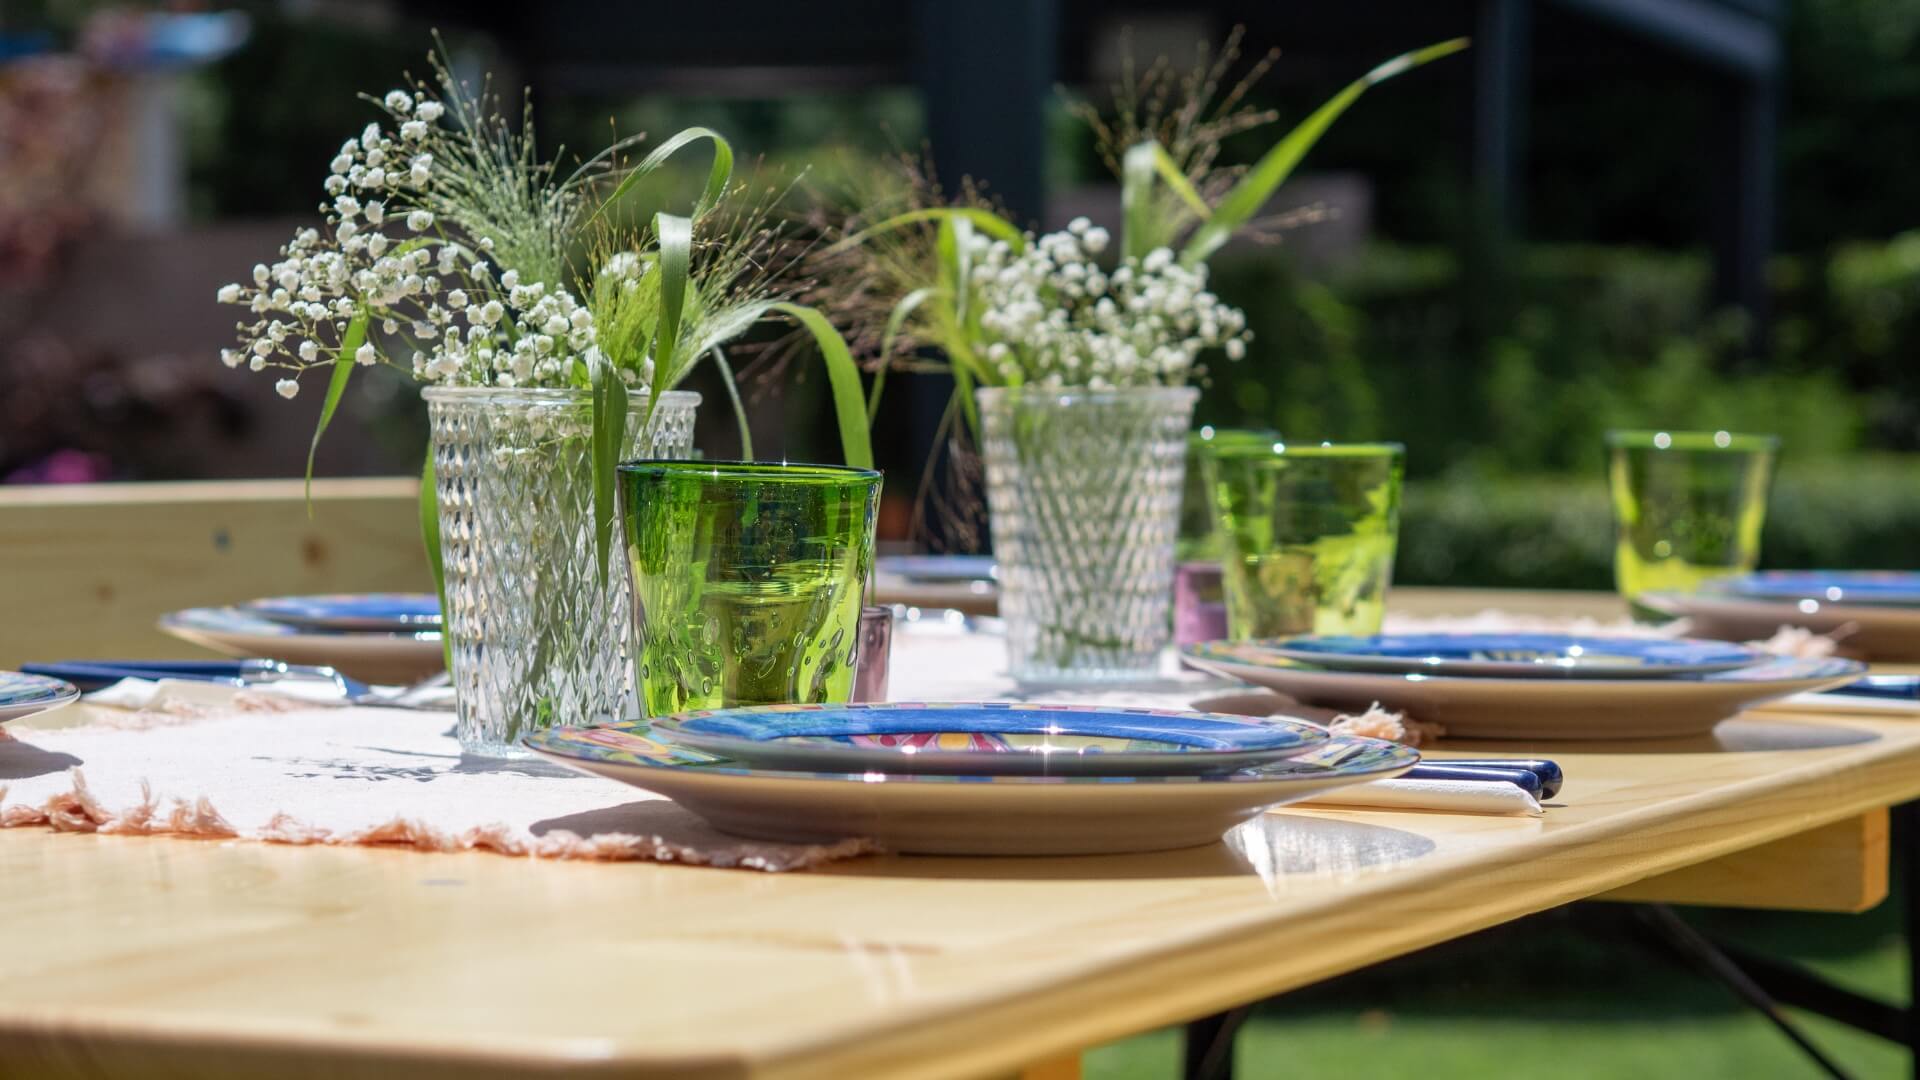 The wide beer garden table set in nature has been lovingly decorated for a meal in the garden.